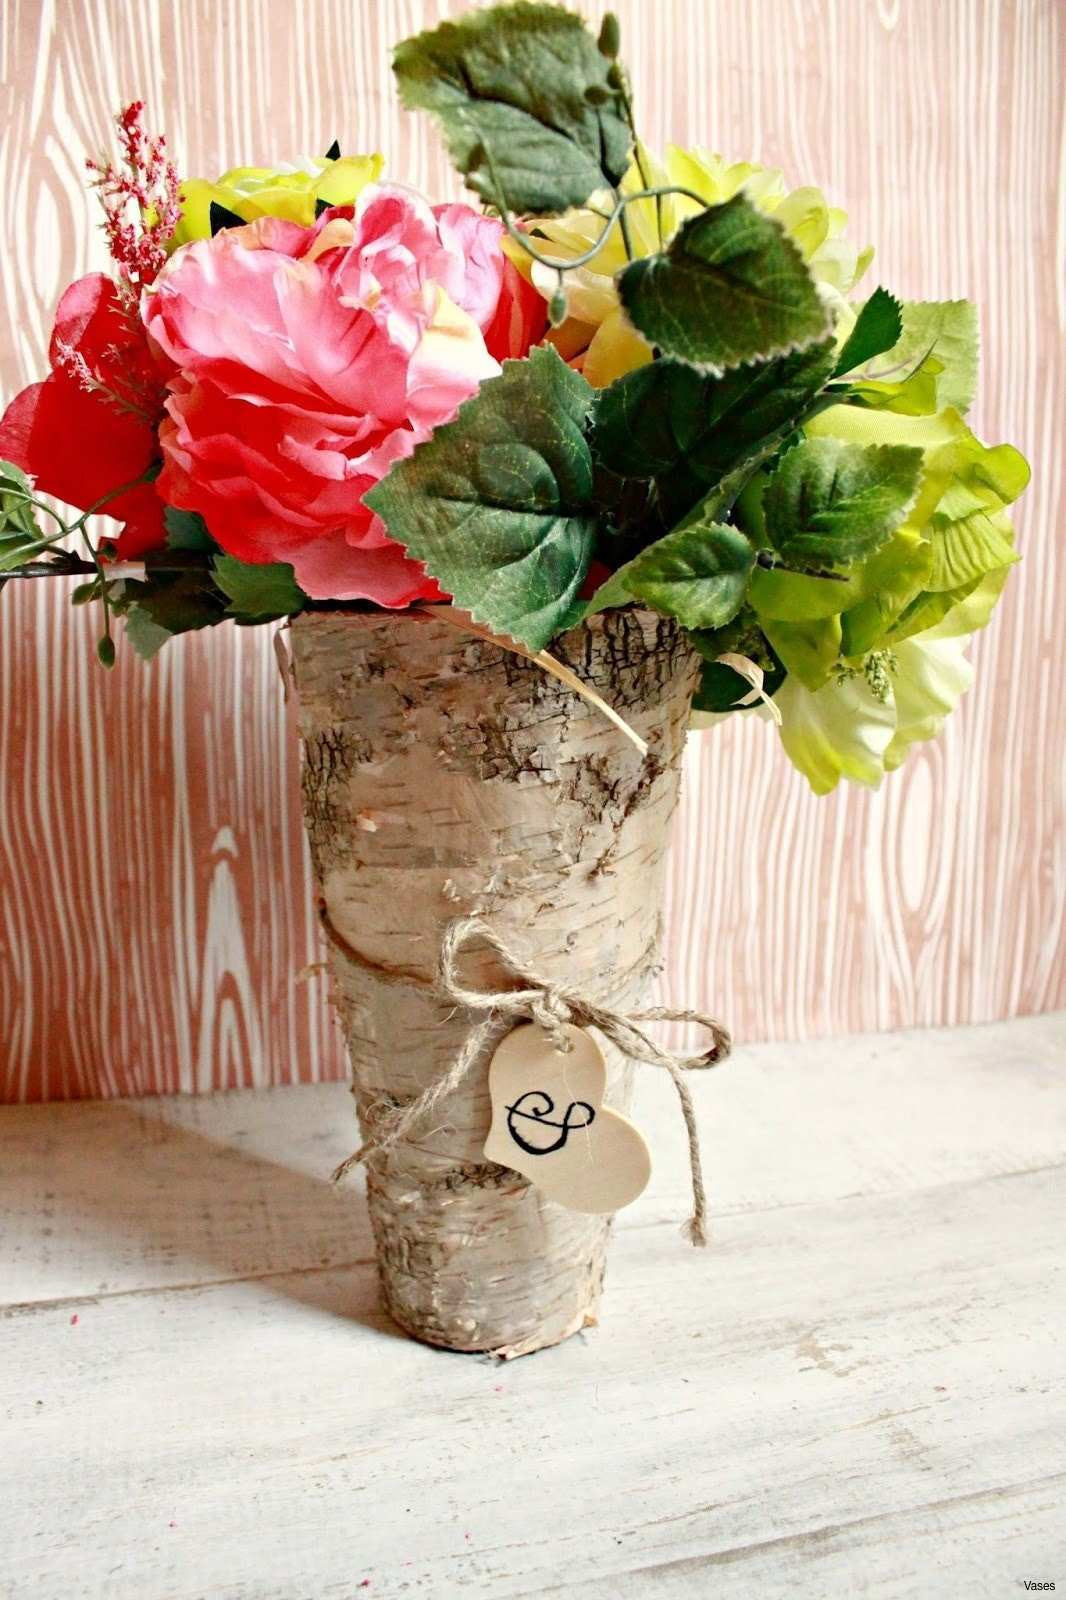 18 Unique Bell Jar Vase 2024 free download bell jar vase of diy centerpiece ideas for christmas luxury ukrasi od rolne toalet with diy centerpiece ideas for christmas new flowers and decorations for weddings h vases diy wood vase